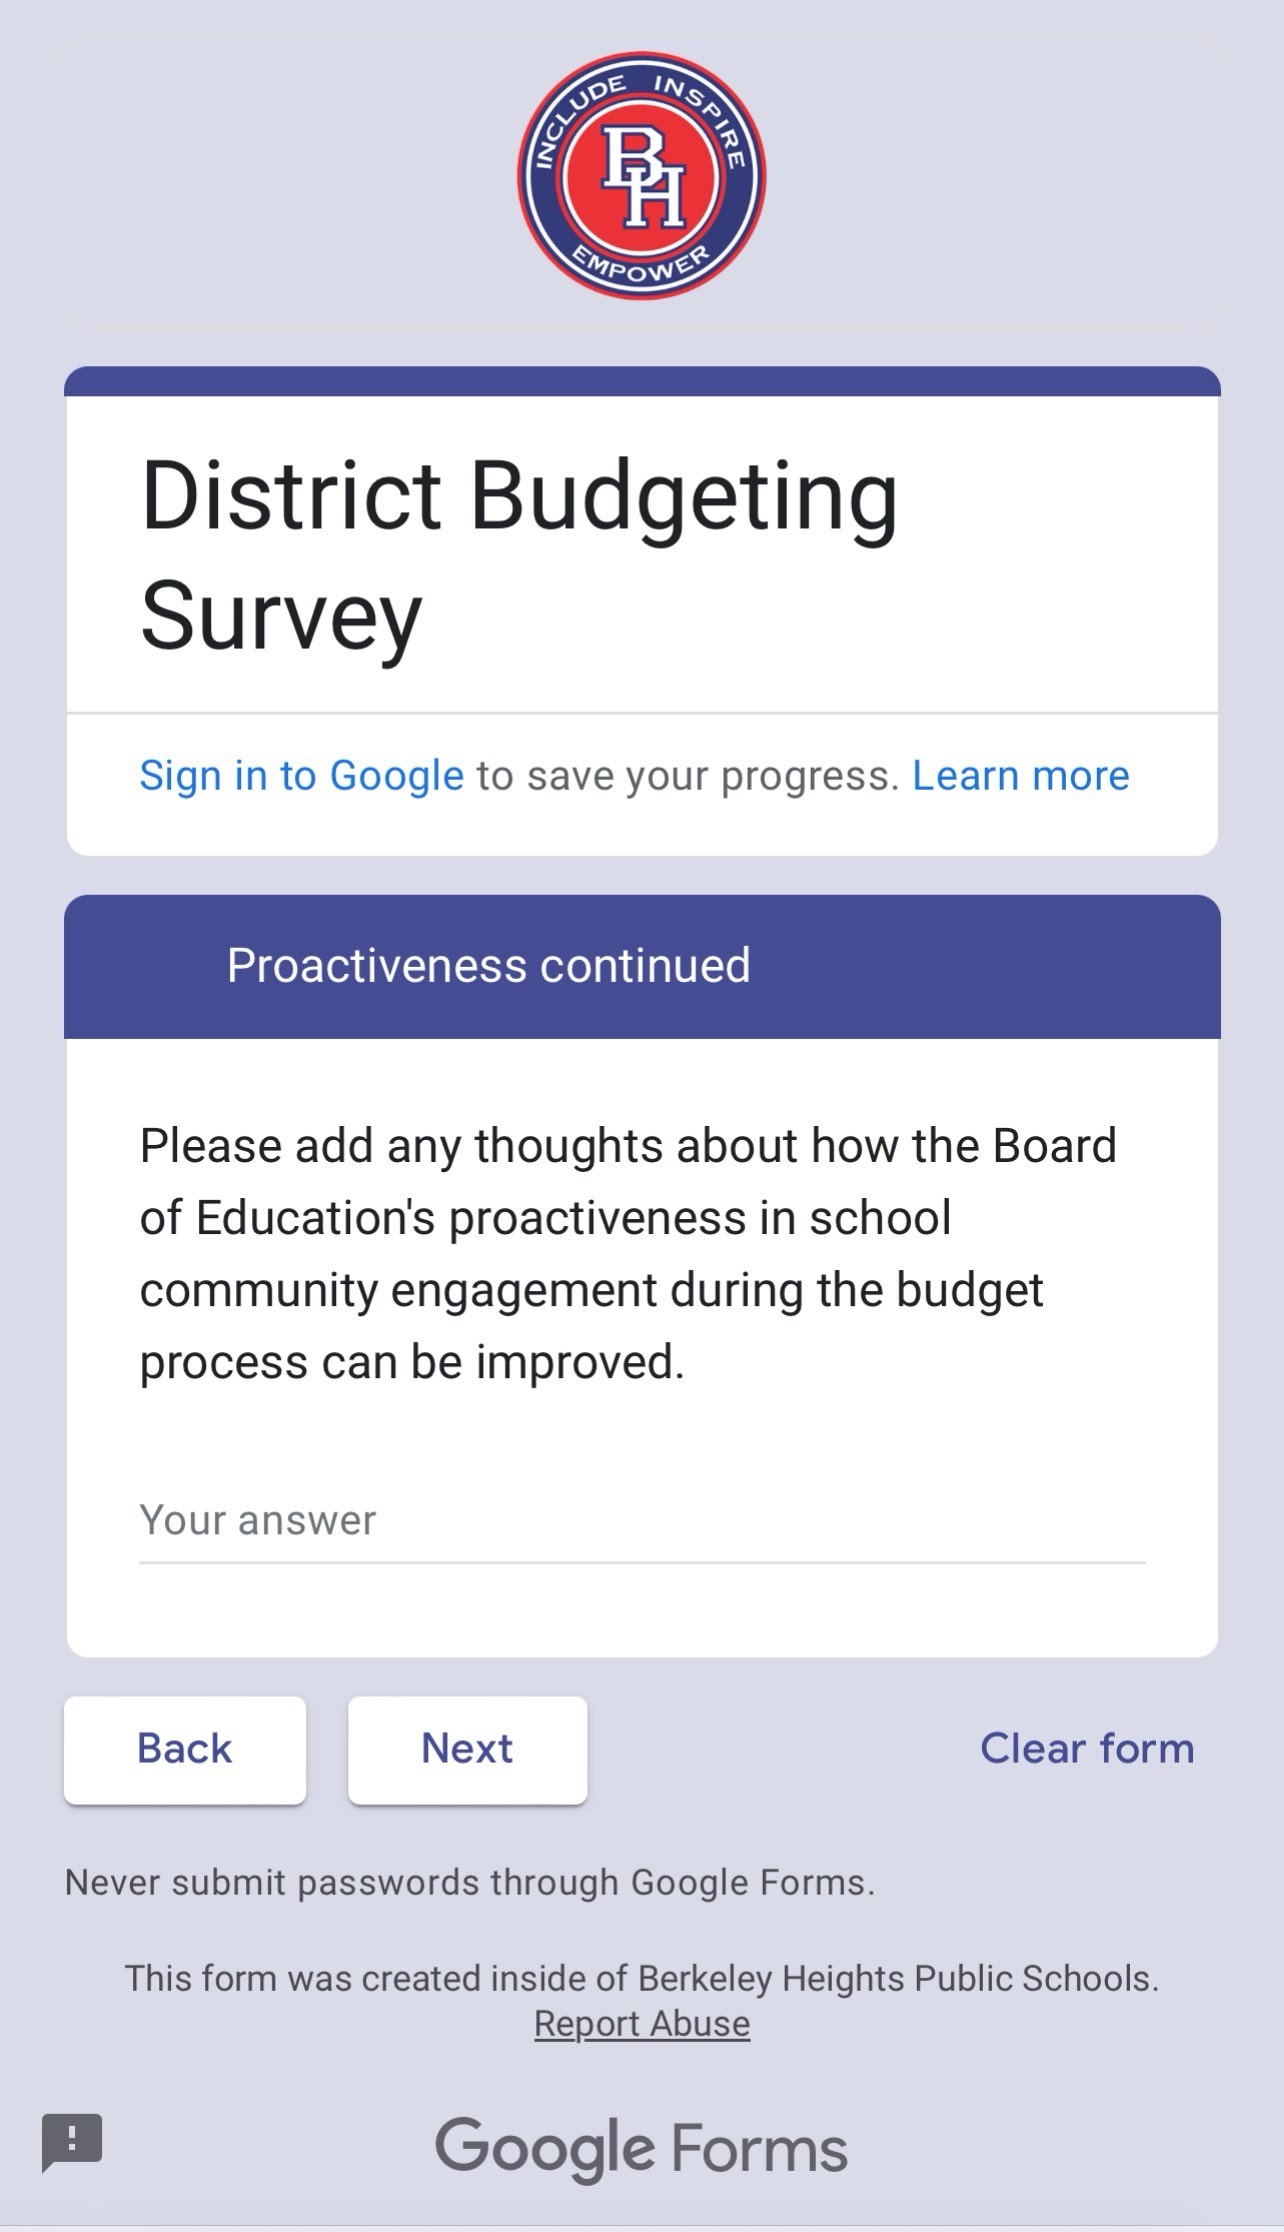 BHPSNJ Releases Its First Budget Survey